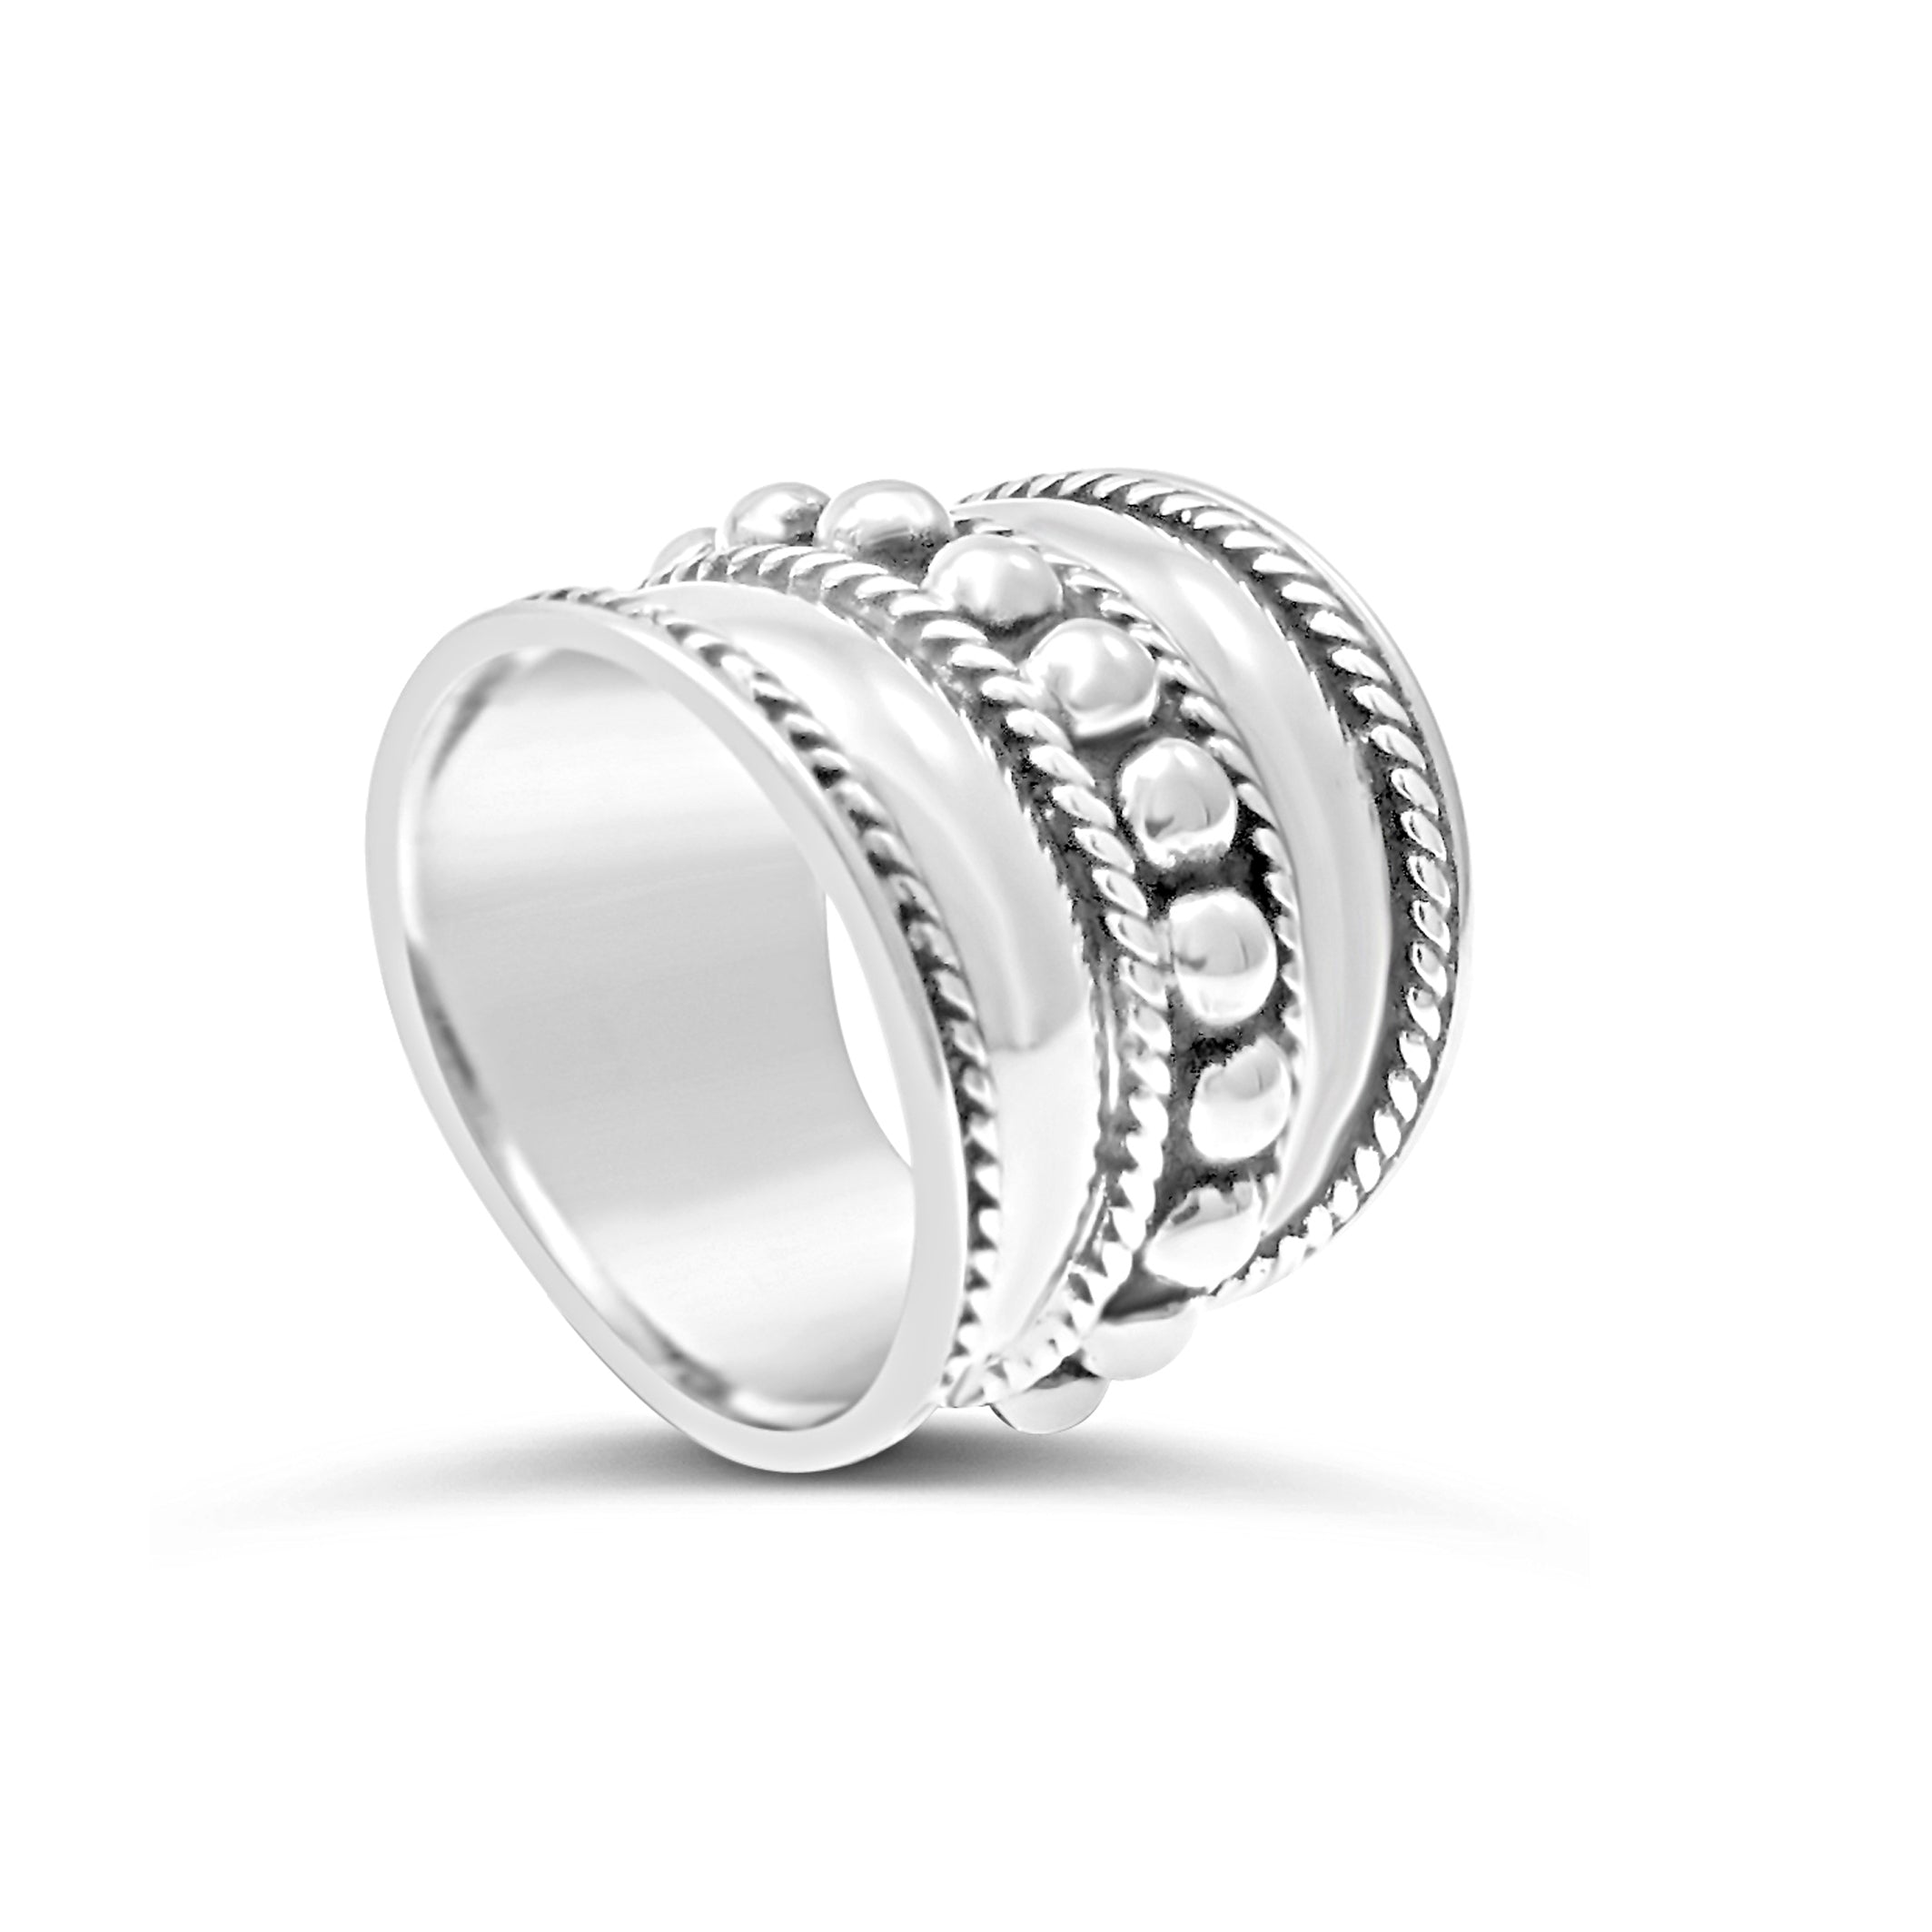 Sterling Silver Plait Edge and Balls Ring 925SS